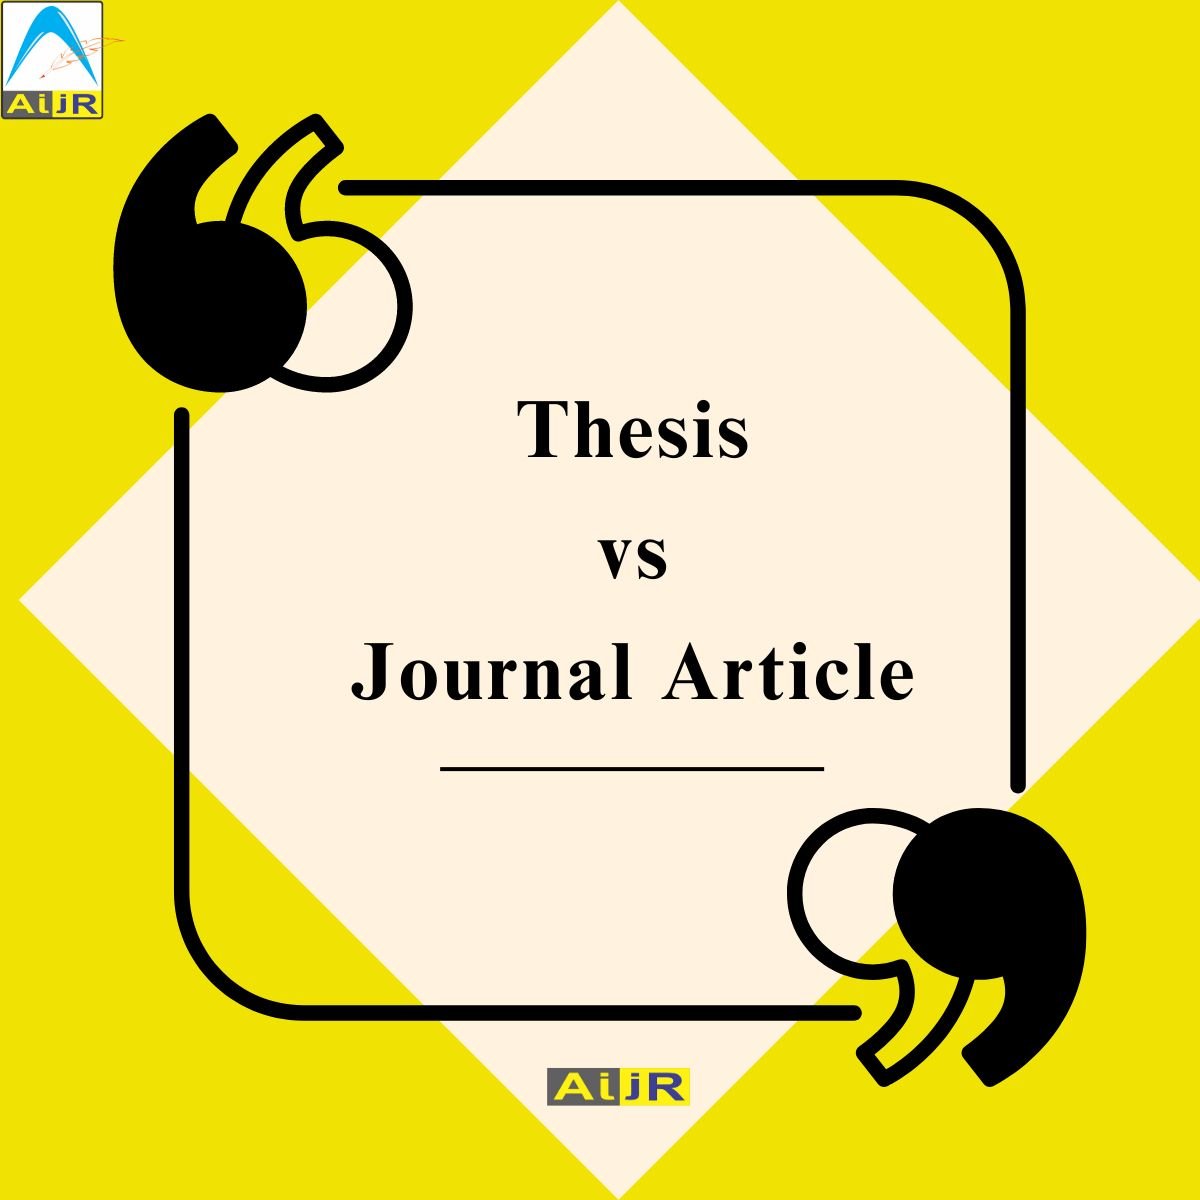 published article vs thesis